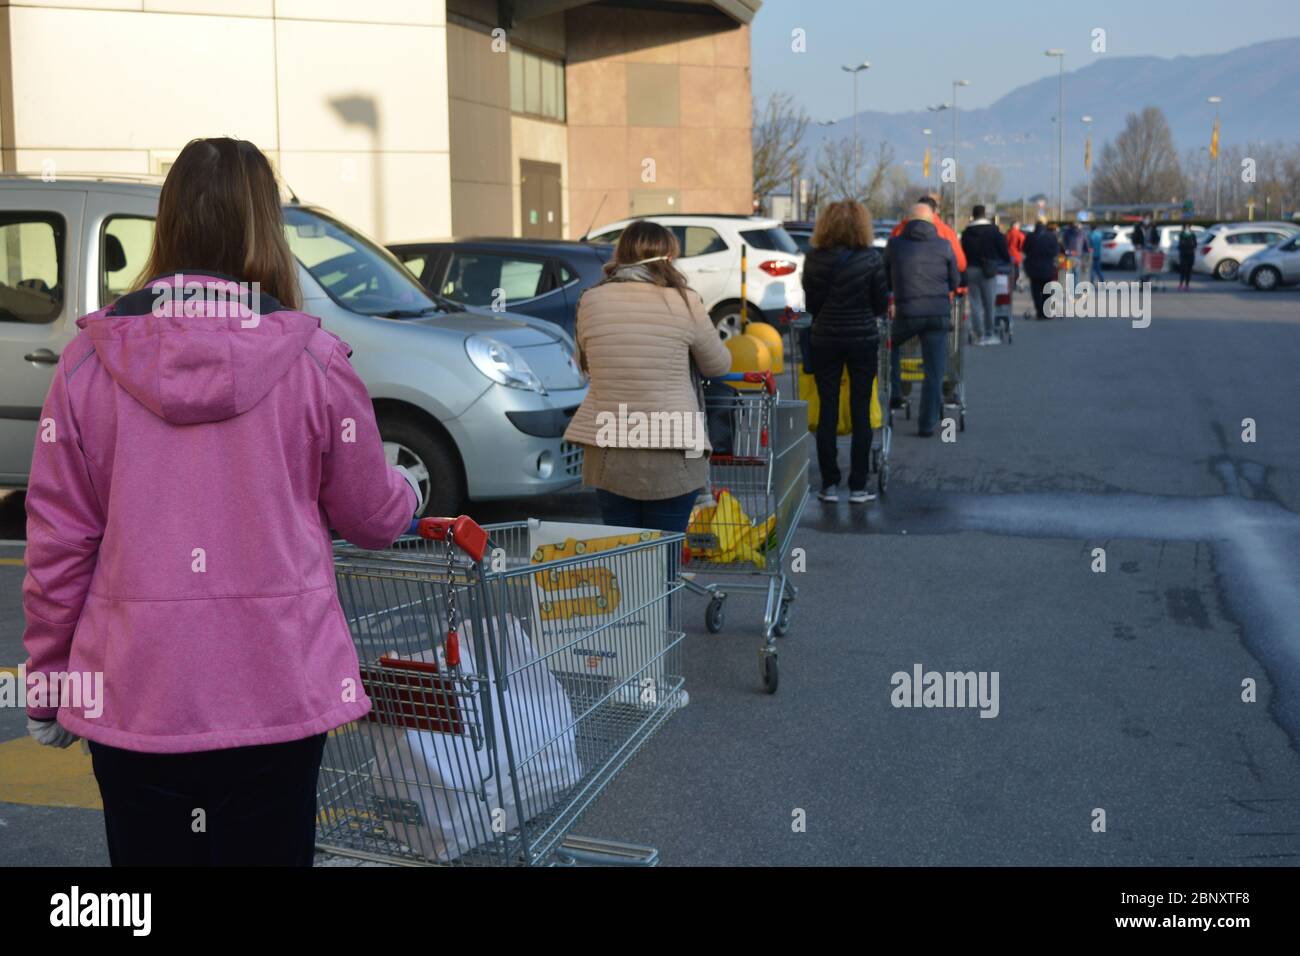 Daily reality during coronavirus pandemic: a long line of people waiting with patience in a sunny day to stockpile groceries. Reopening italian towns Stock Photo